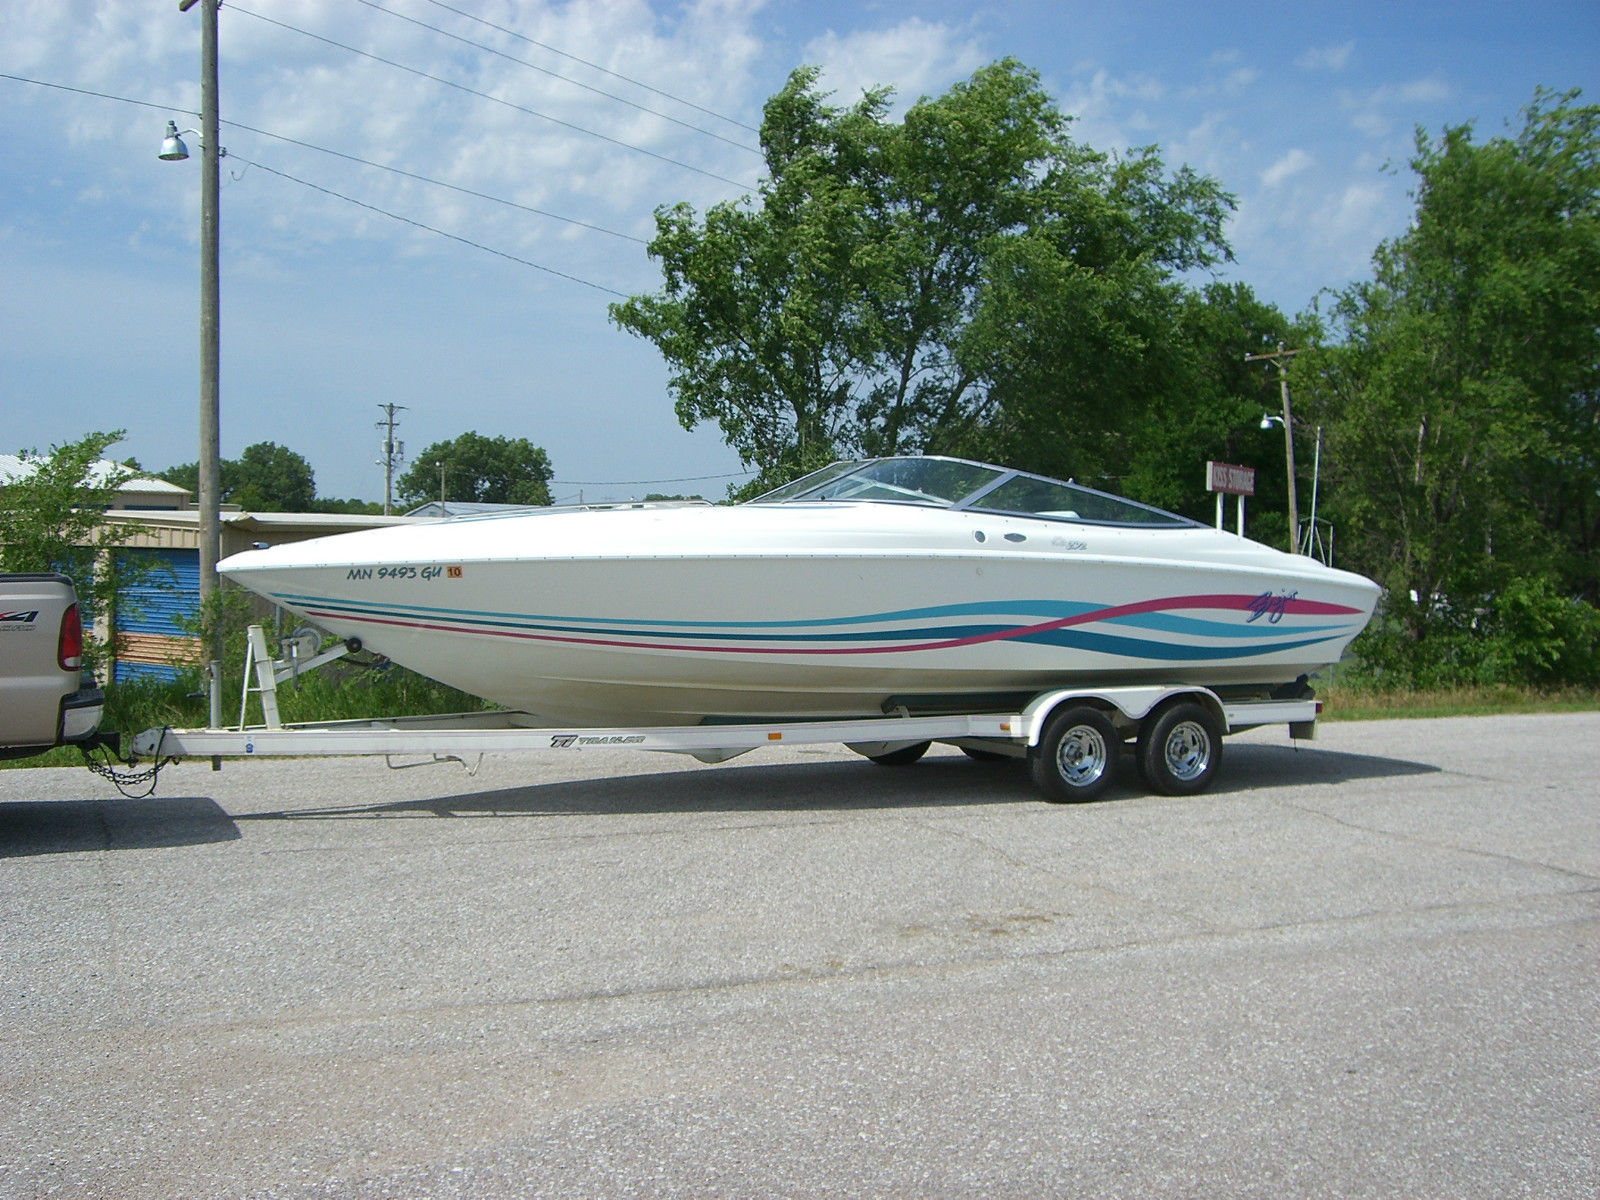 baja-272-for-sale-for-16-500-boats-from-usa